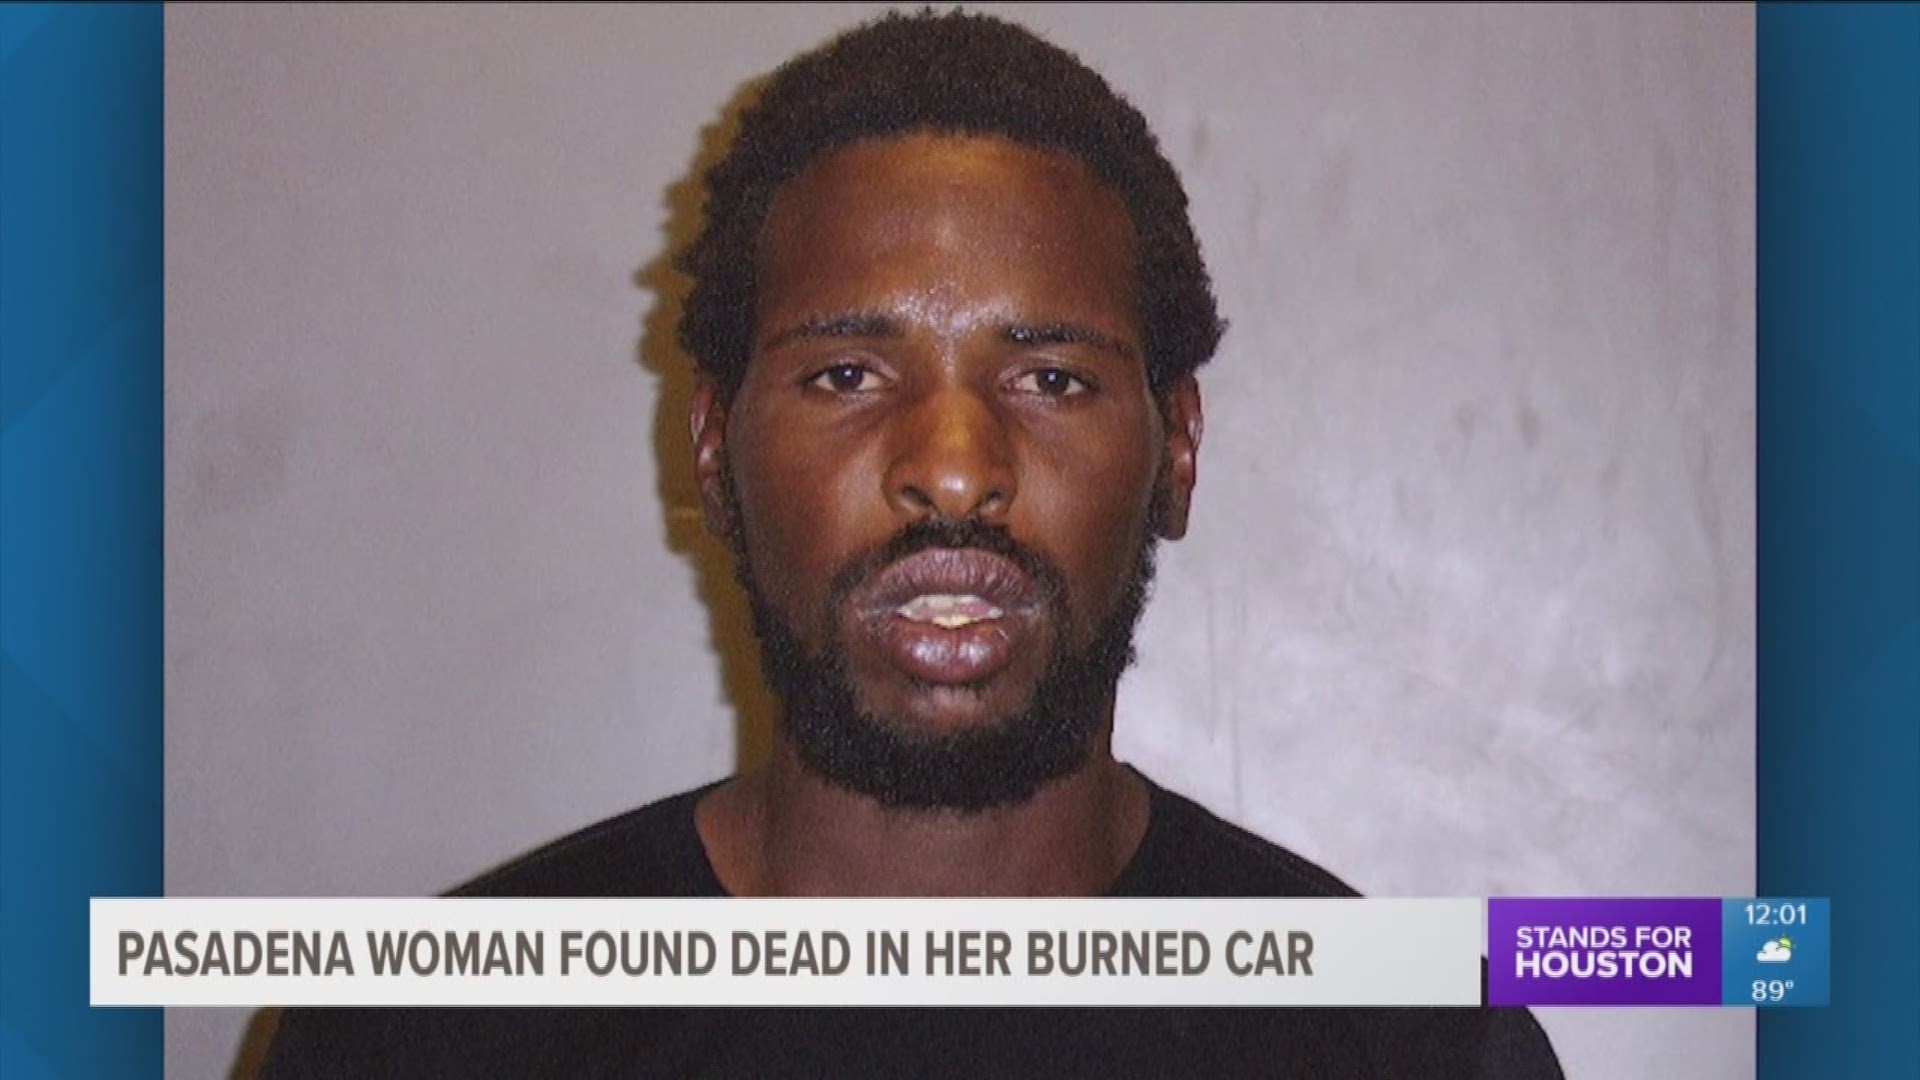 A man has been arrested for kidnapping and setting a woman's car on fire in Pasadena, according to the Pasadena Police Department.